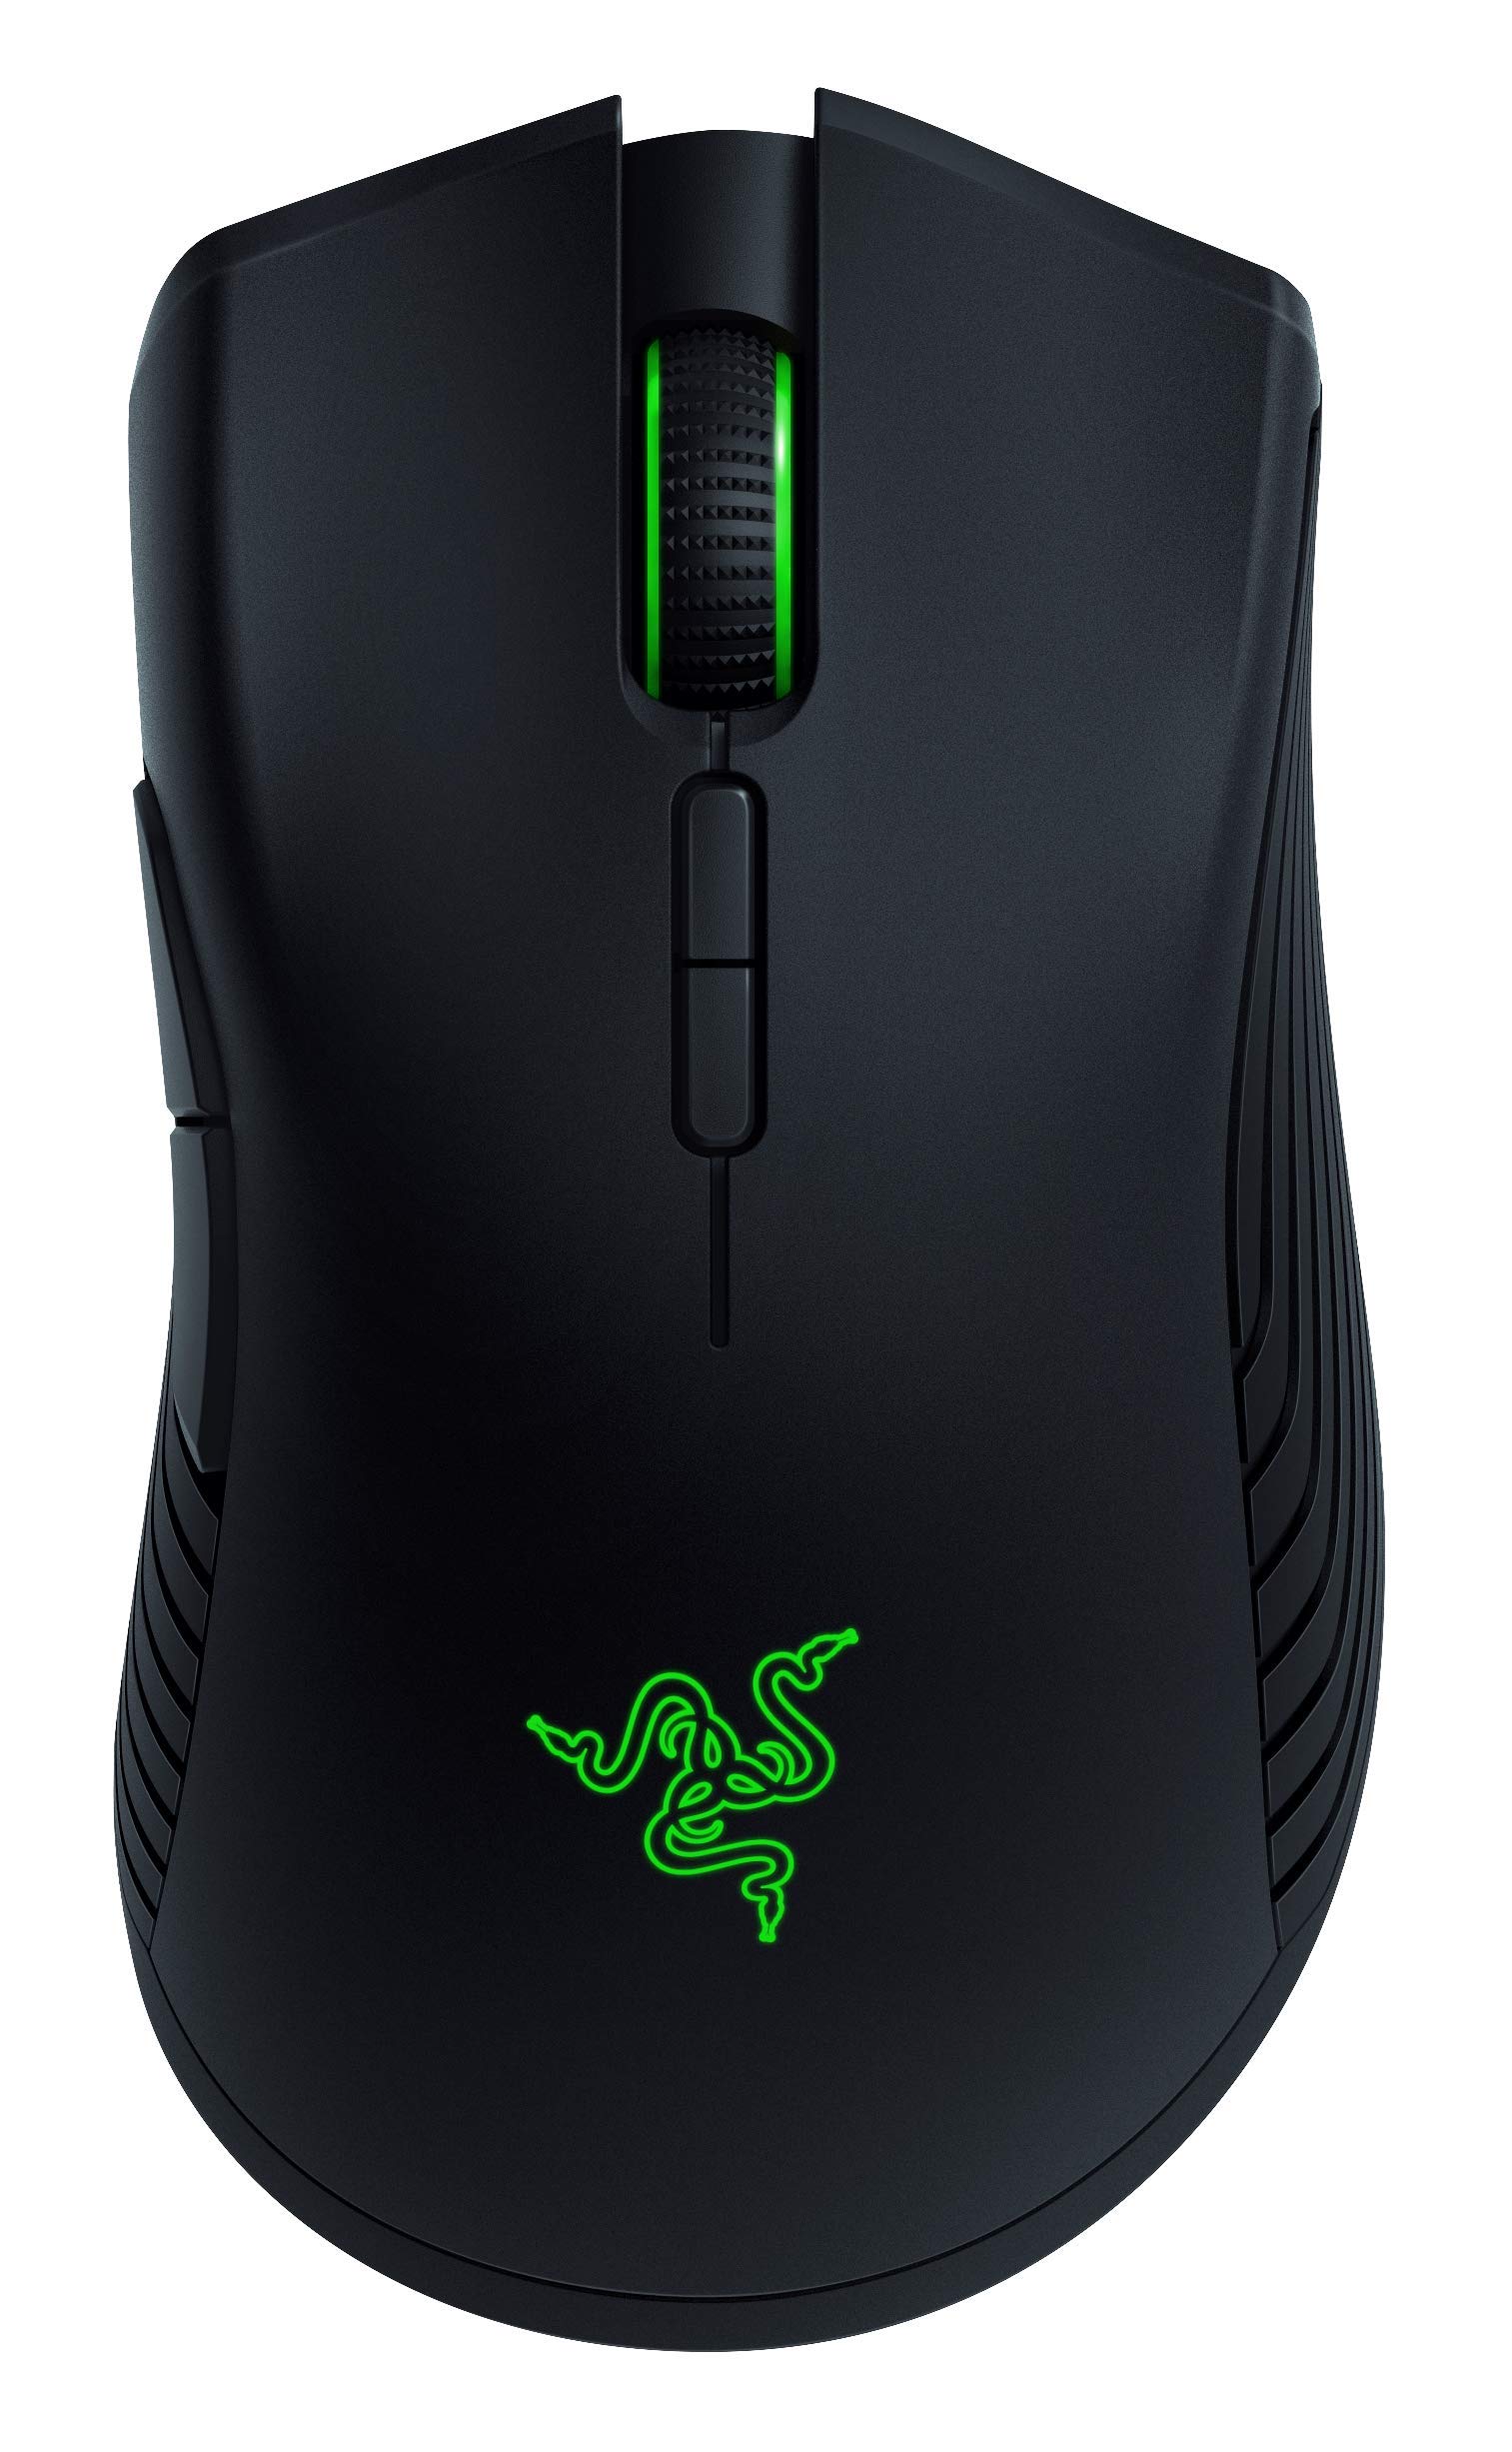 Razer mouse with precision targeting option